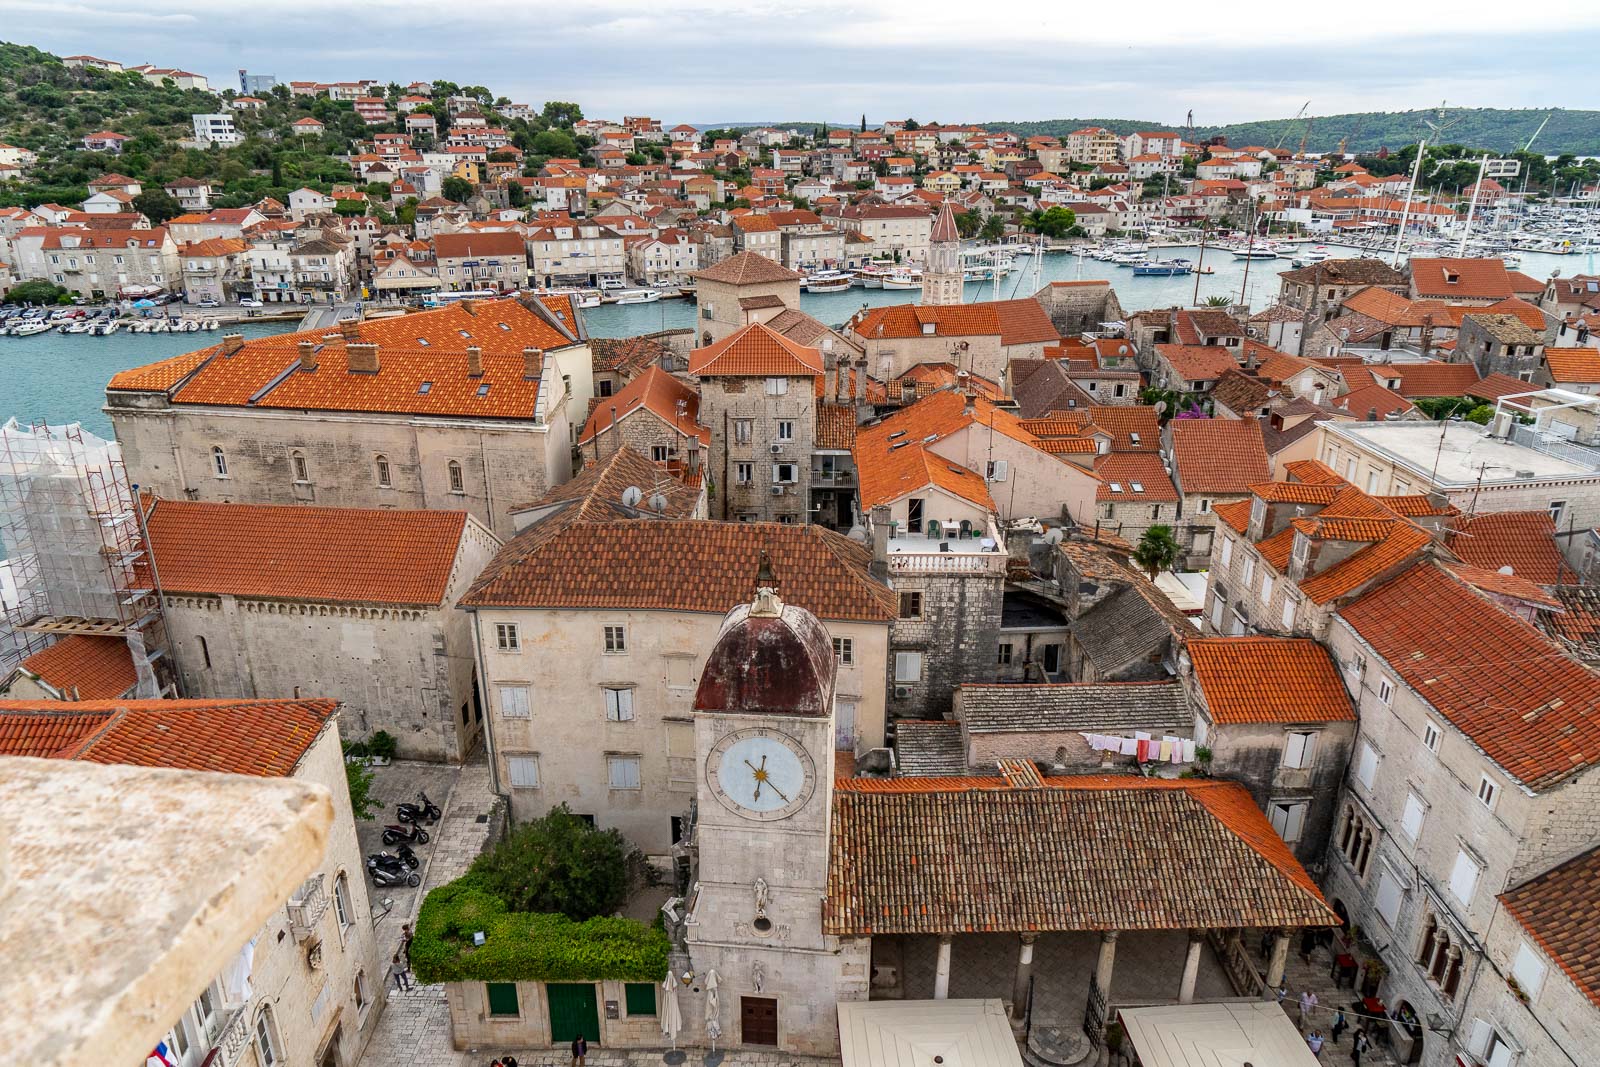 Things to do in Trogir: Climb the Bell Tower